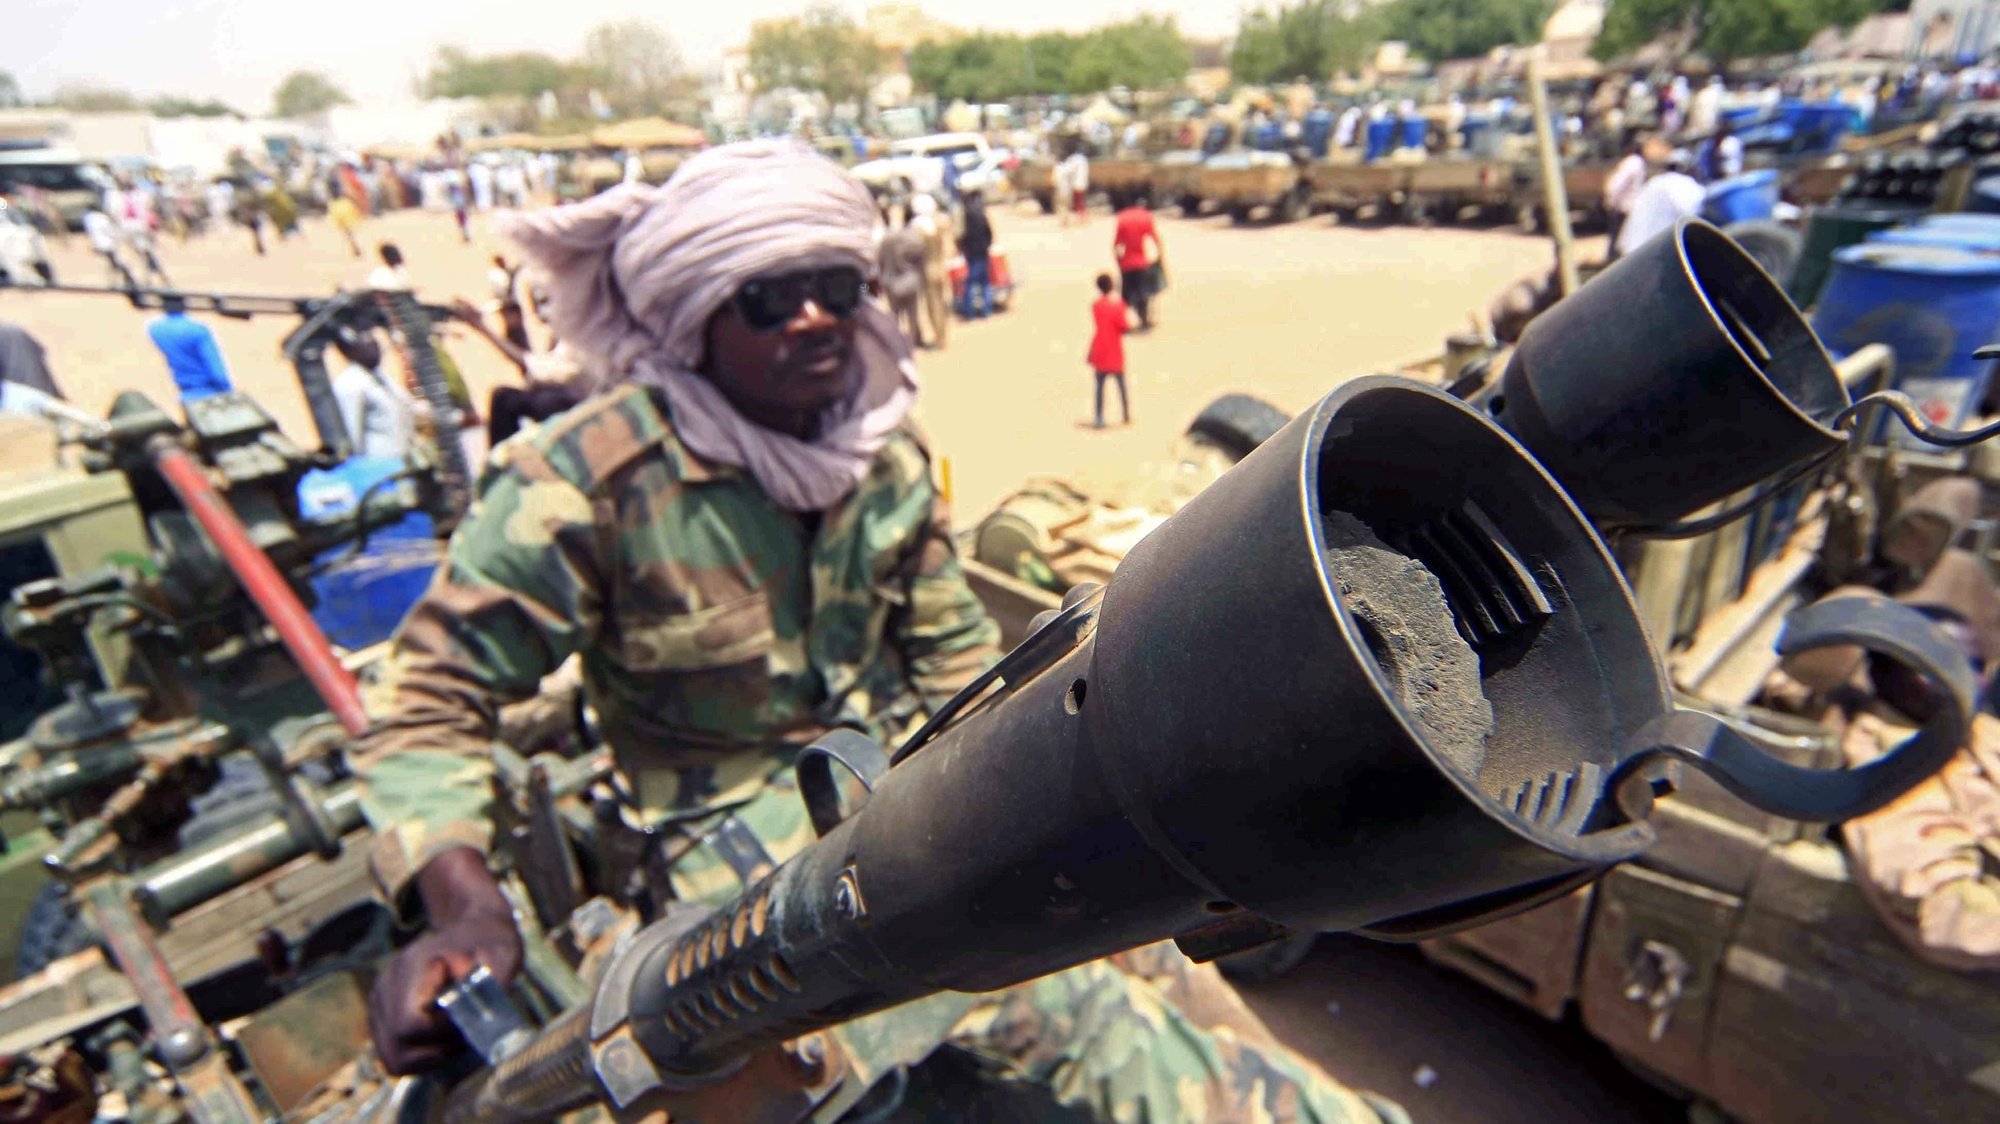 epa08636963 (FILE) - A militia members sits beside military equipment allegedly seized during a battle in the contested area of south Darfur, Nyala, Sudan, 04 May 2015 (reissued 31 August 2020). The Sudanese government and rebel groups on 31 August 2020 will hold a formal signing ceremony after they agreed on a peace deal.  EPA/MARWAN ALI *** Local Caption *** 51917573